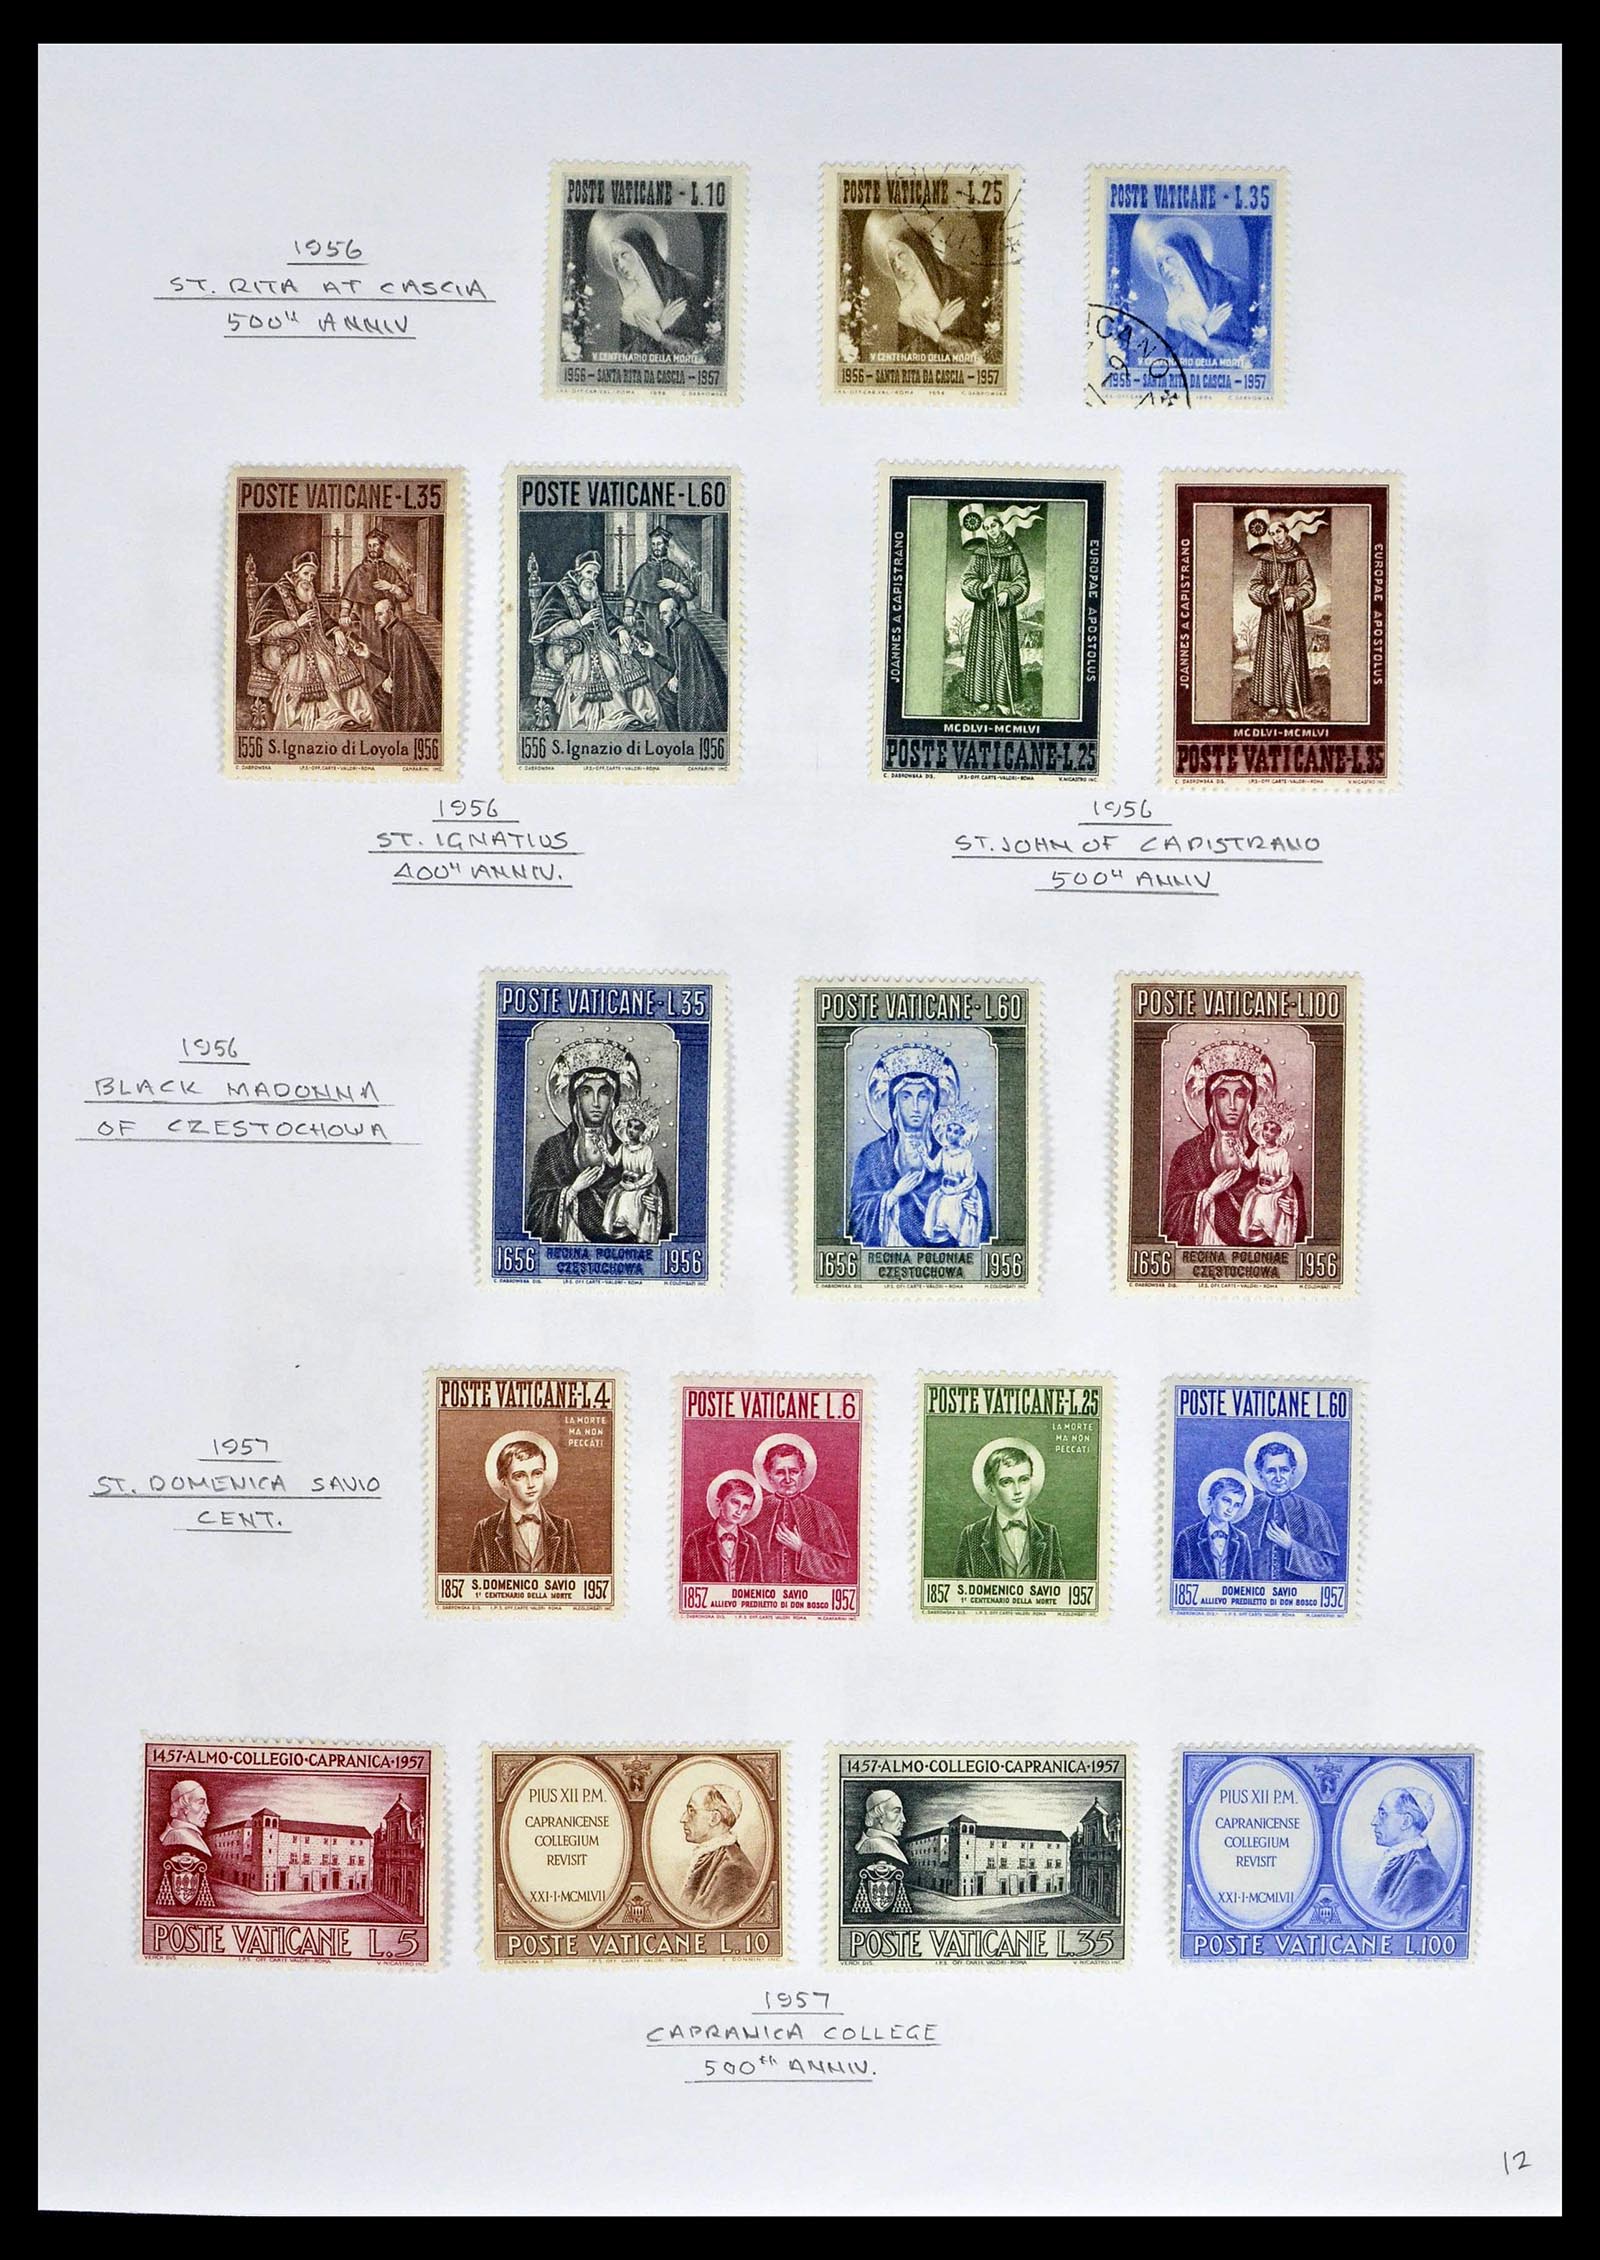 39099 0014 - Stamp collection 39099 Vatican 1852-2008.